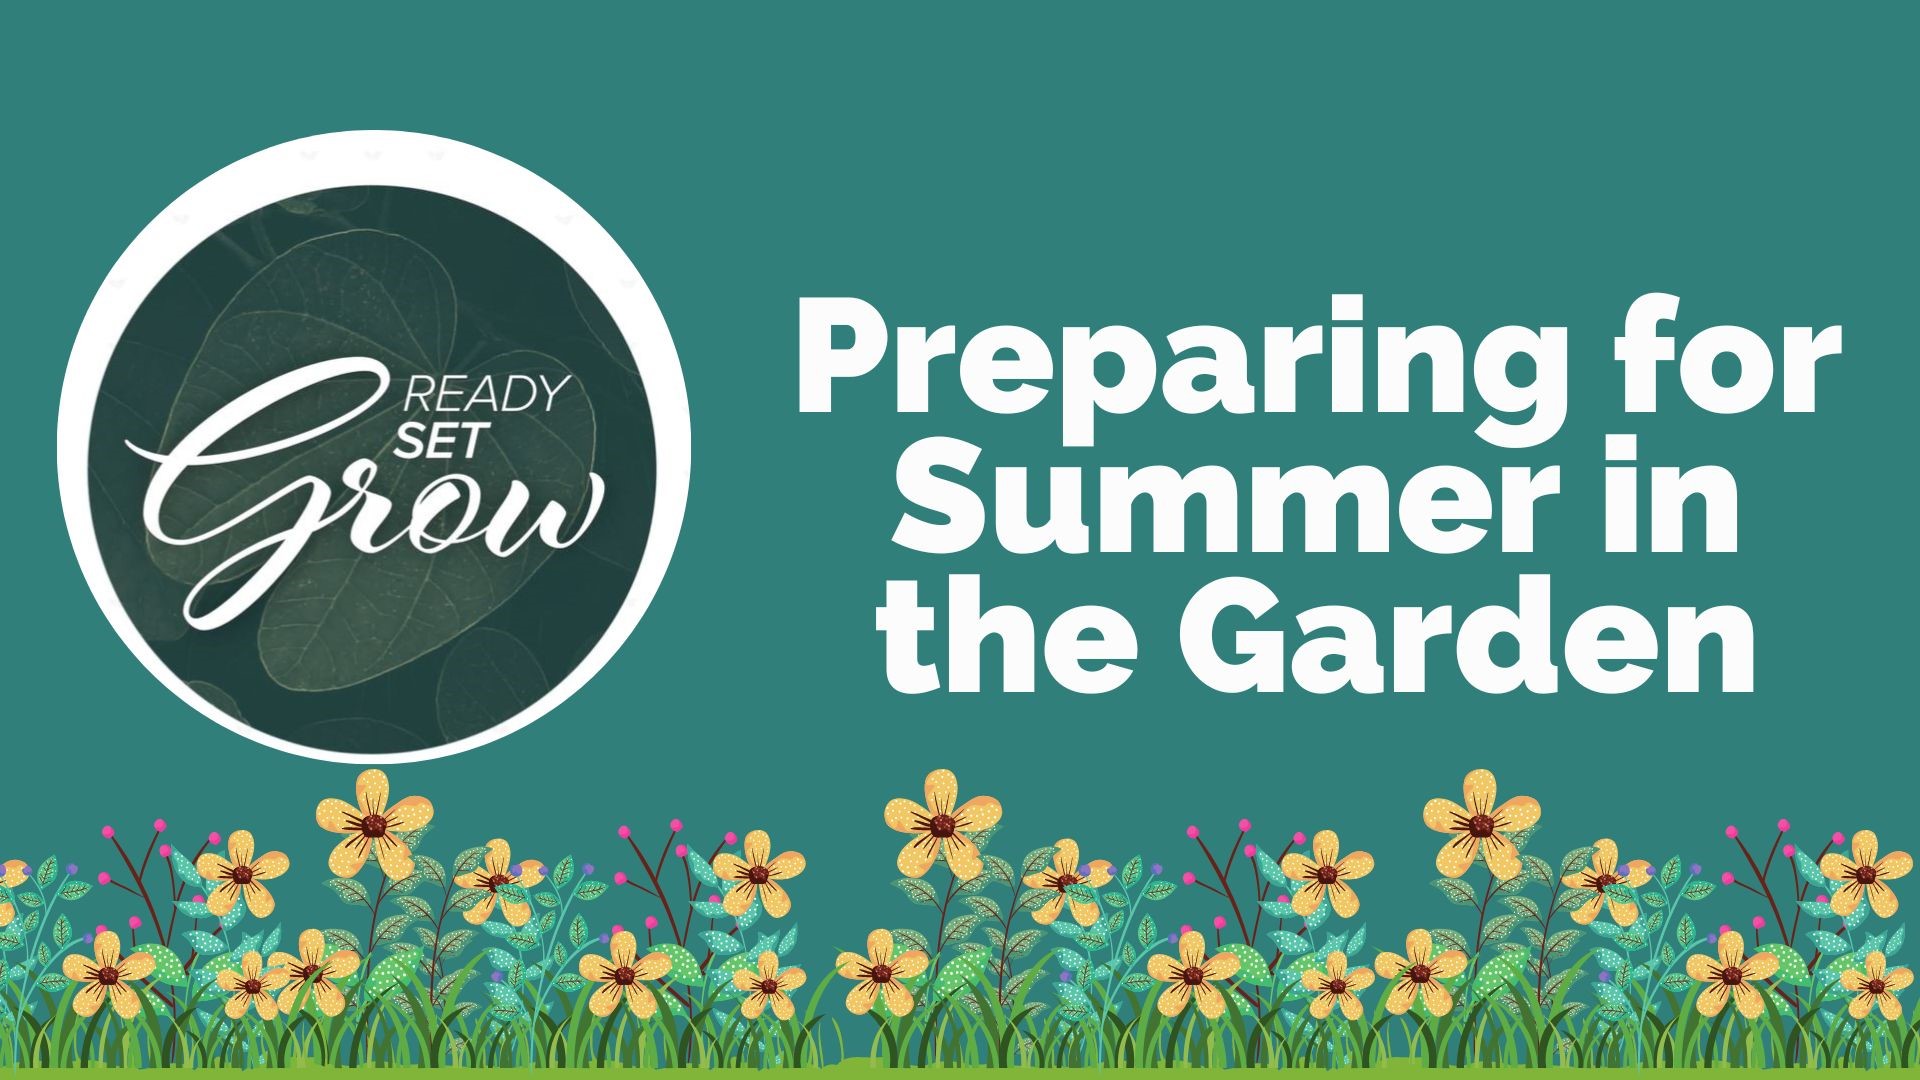 As we head into the summer season, it is important to make sure your gardens are prepped and ready to go. A look at planting herbs, fruit trees and more!